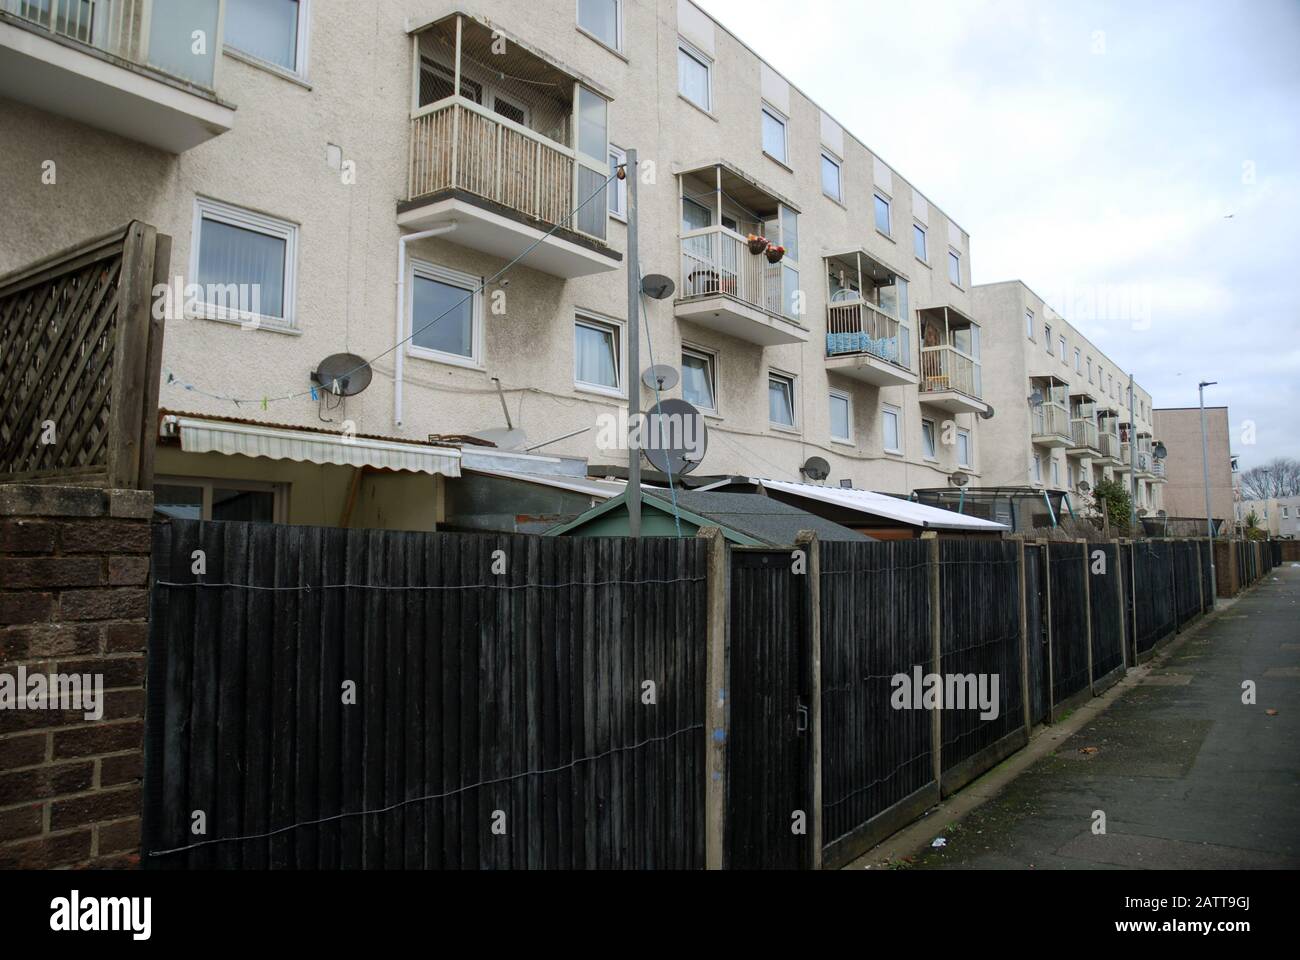 Council Flats, Portsmouth, Hampshire, GB Stock Photo - Alamy